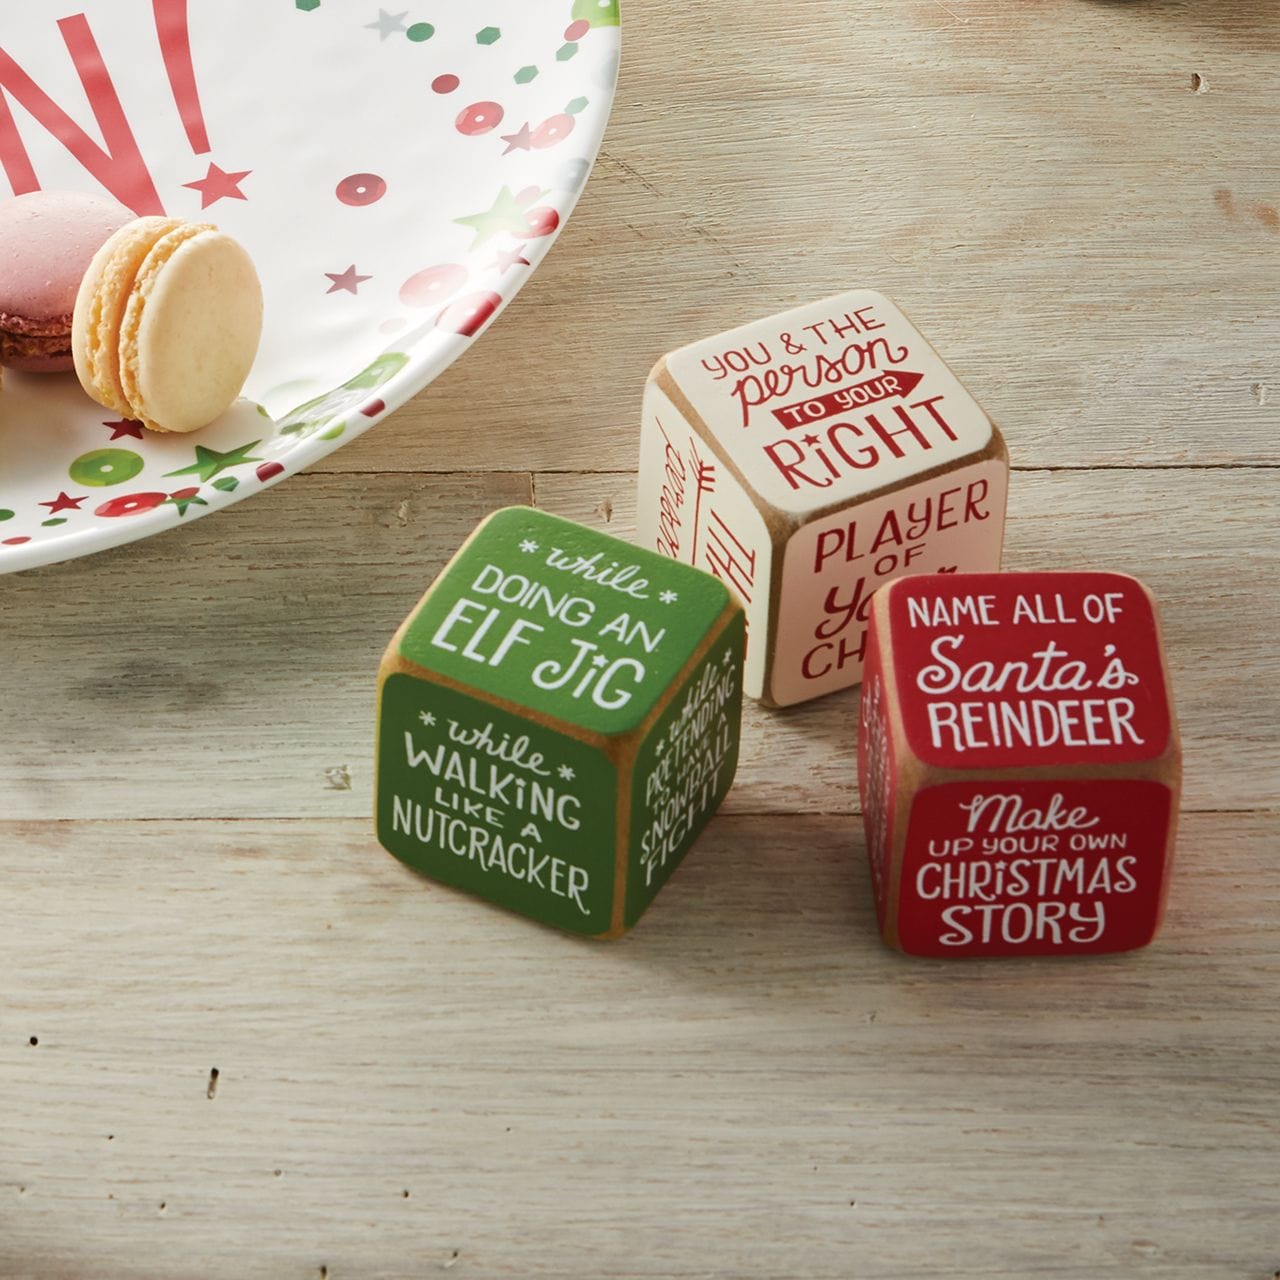 Christmas Get the Party Started Dice Cubes Fun!